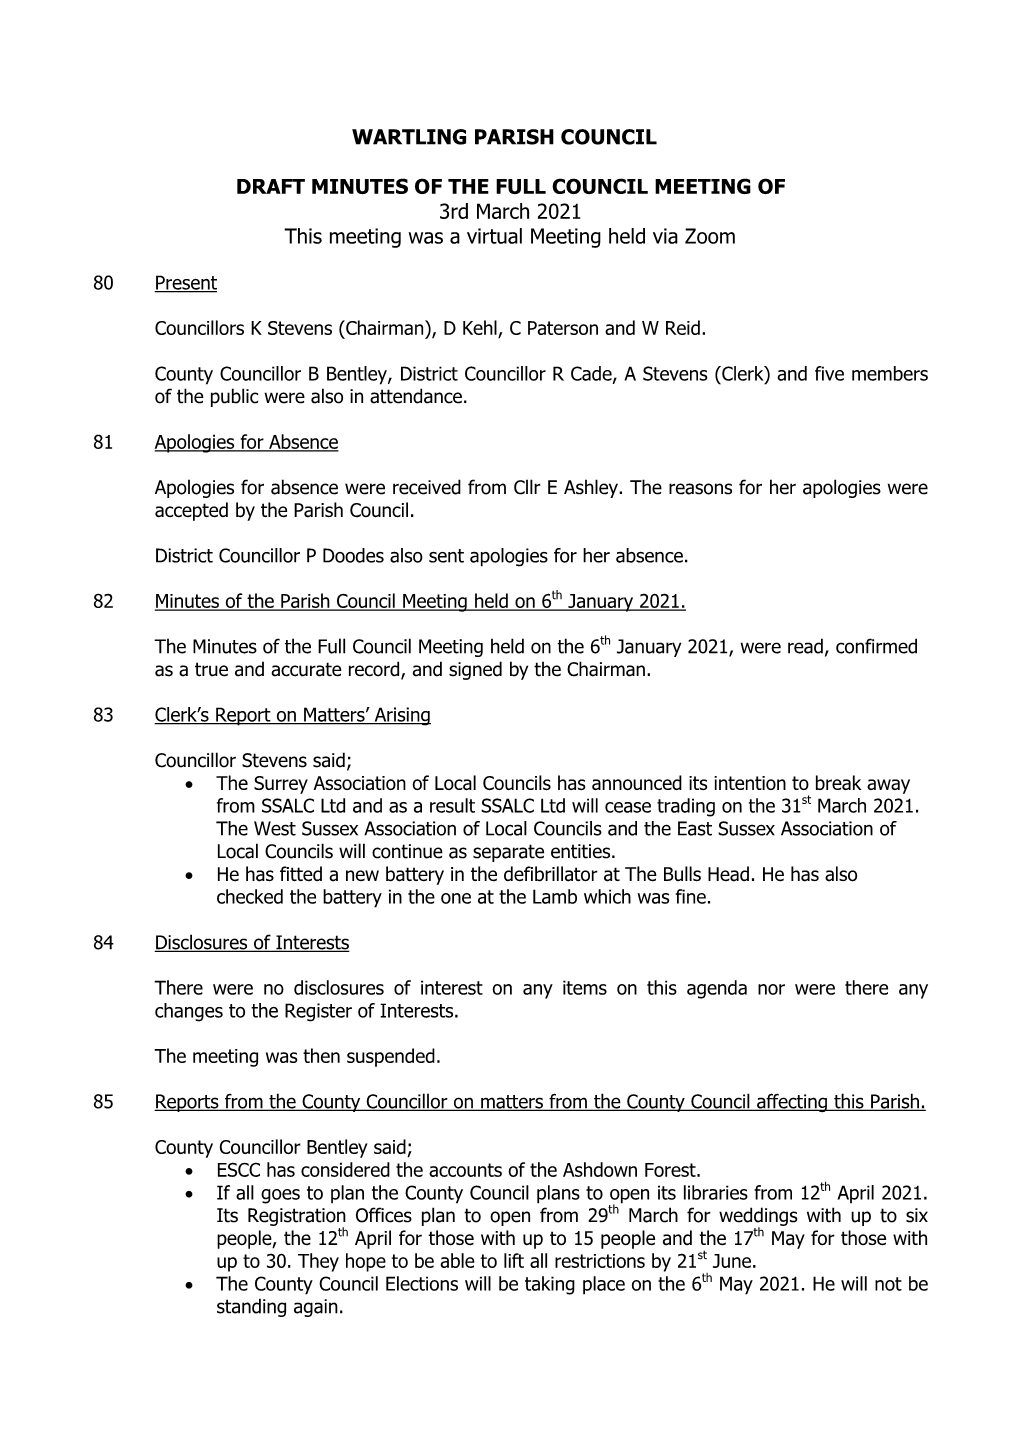 WARTLING PARISH COUNCIL DRAFT MINUTES of the FULL COUNCIL MEETING of 3Rd March 2021 This Meeting Was a Virtual Meeting Held